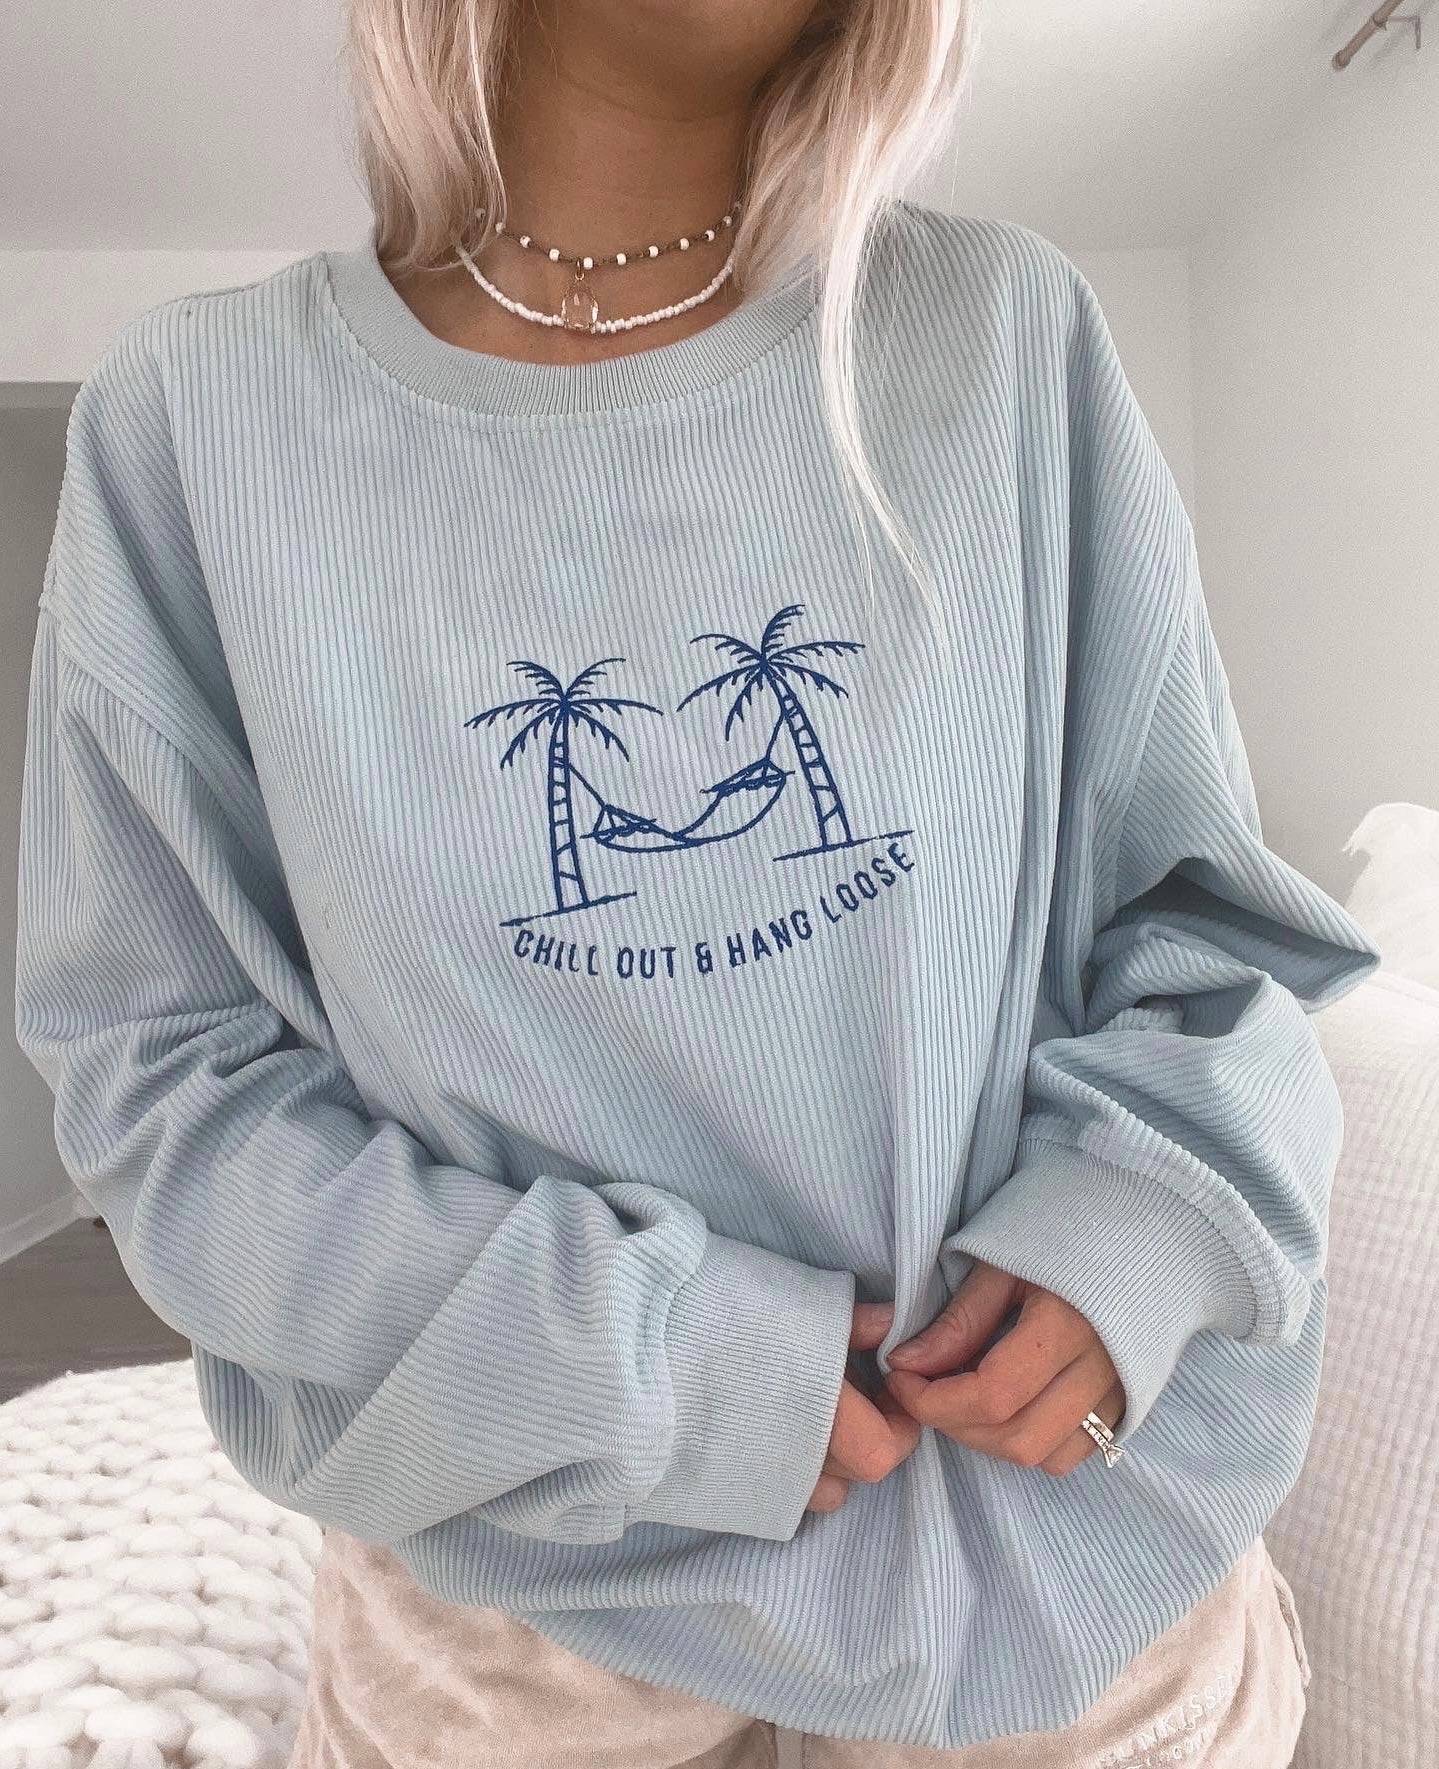 Chill Out and Hang Loose Corduroy Sweatshirt